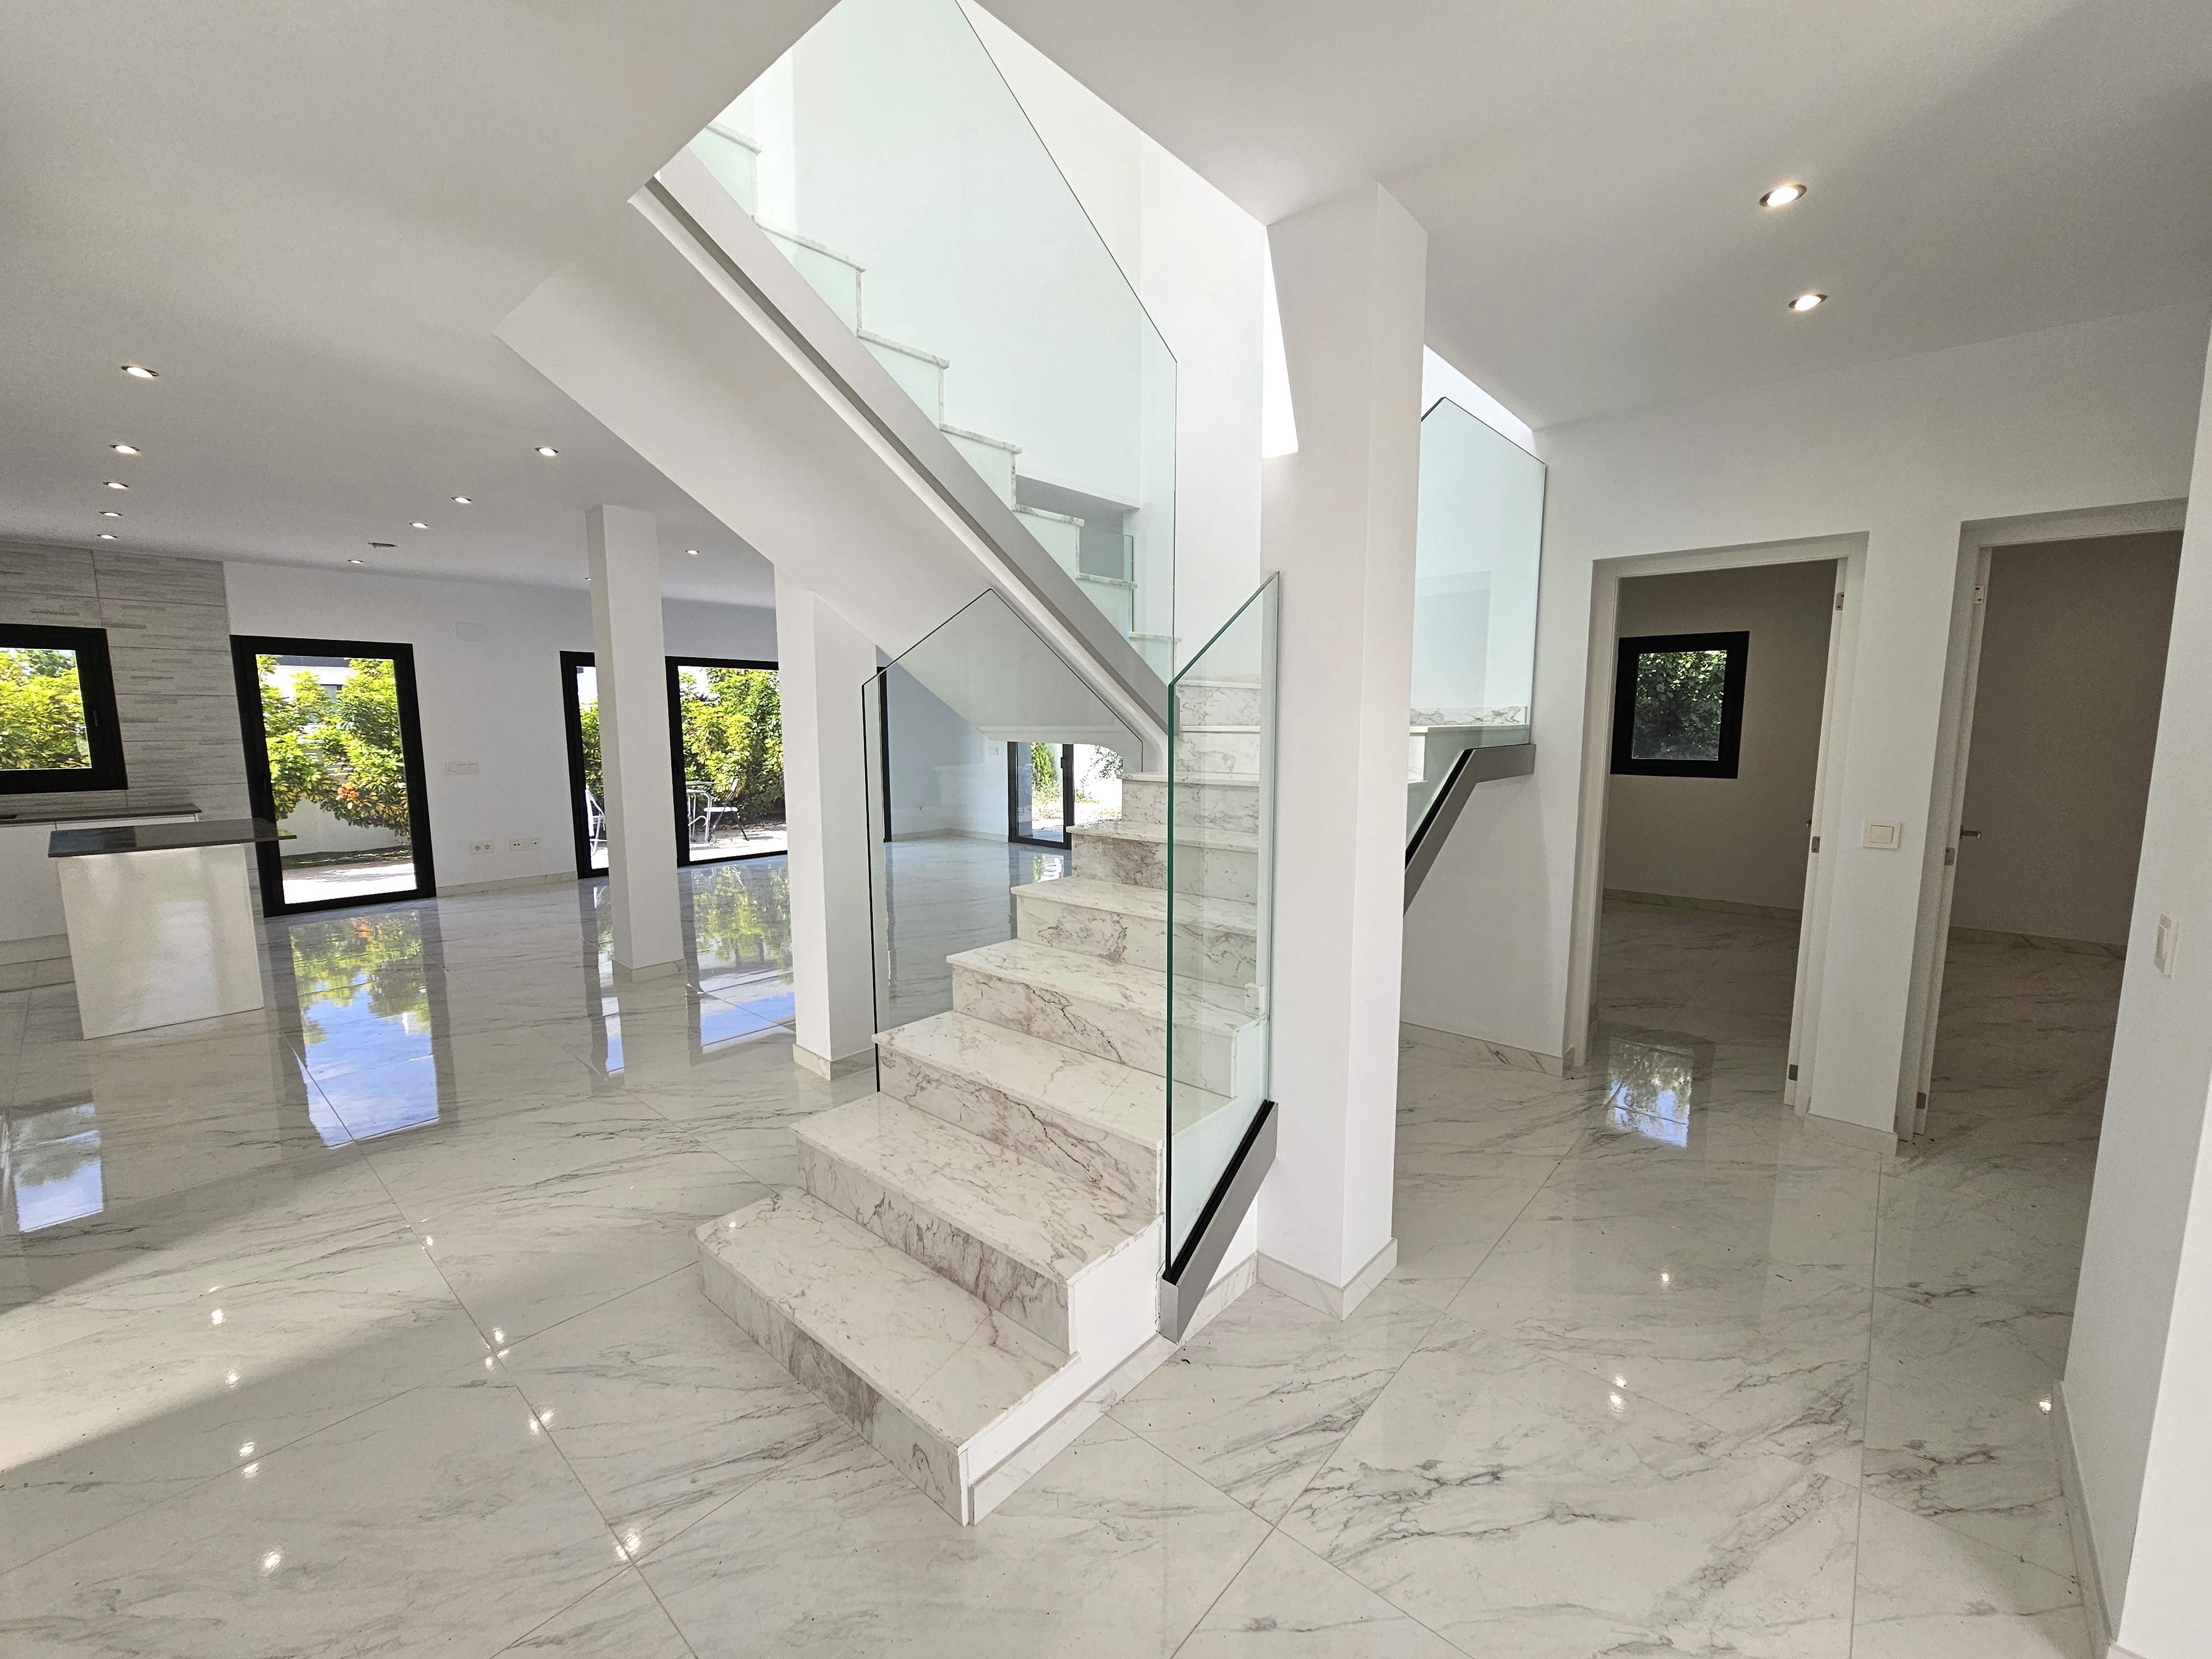 Modern villa in Calpe for sale, very well located